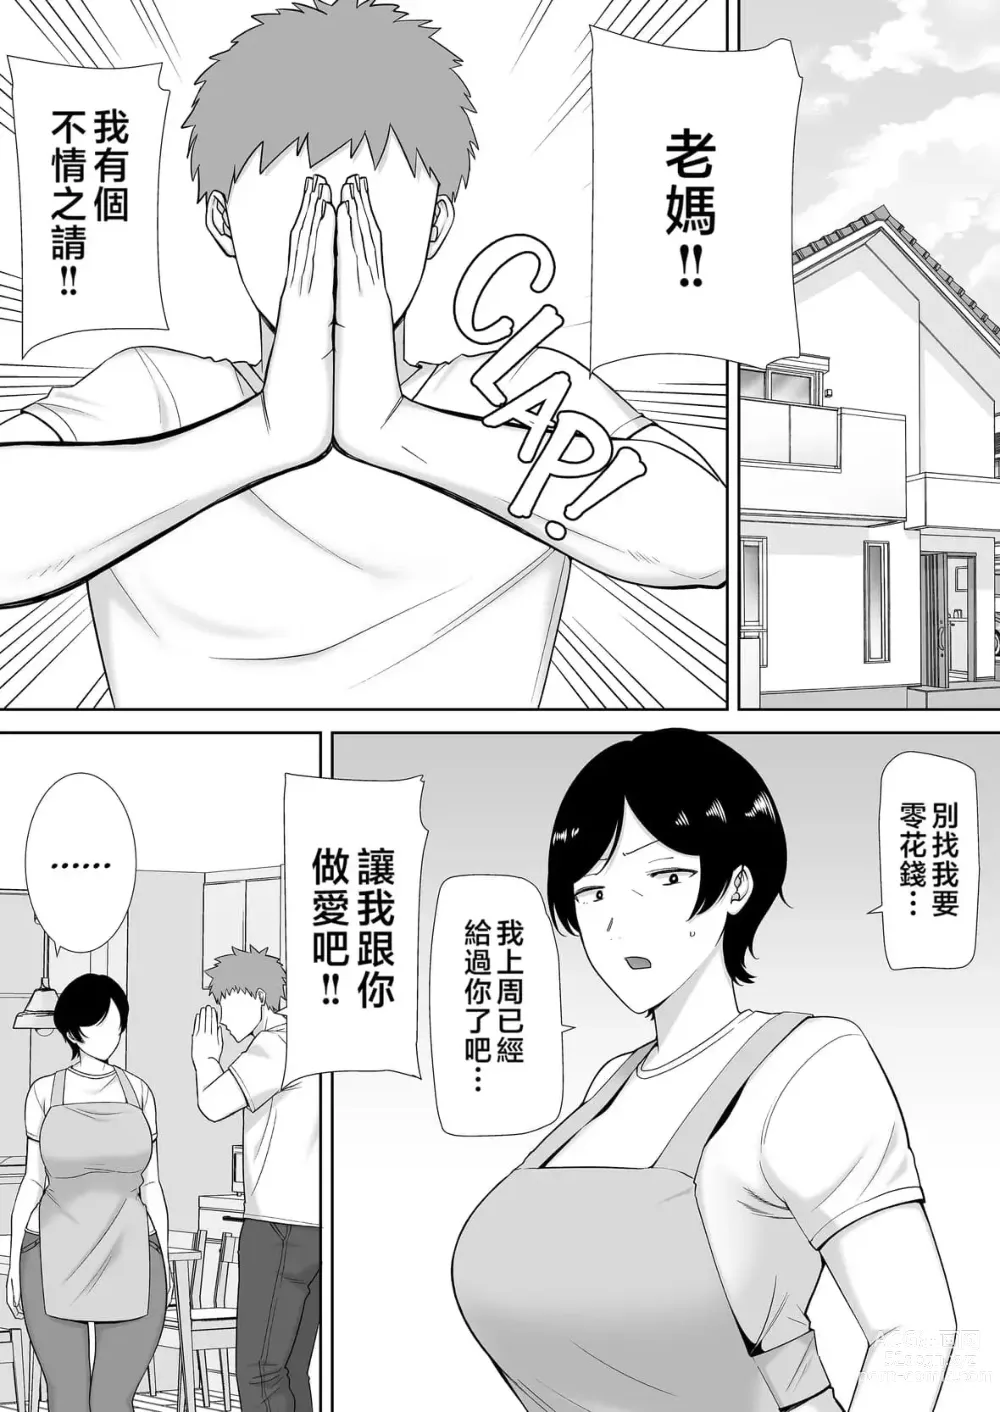 Page 2 of doujinshi even mom want a litle lovin